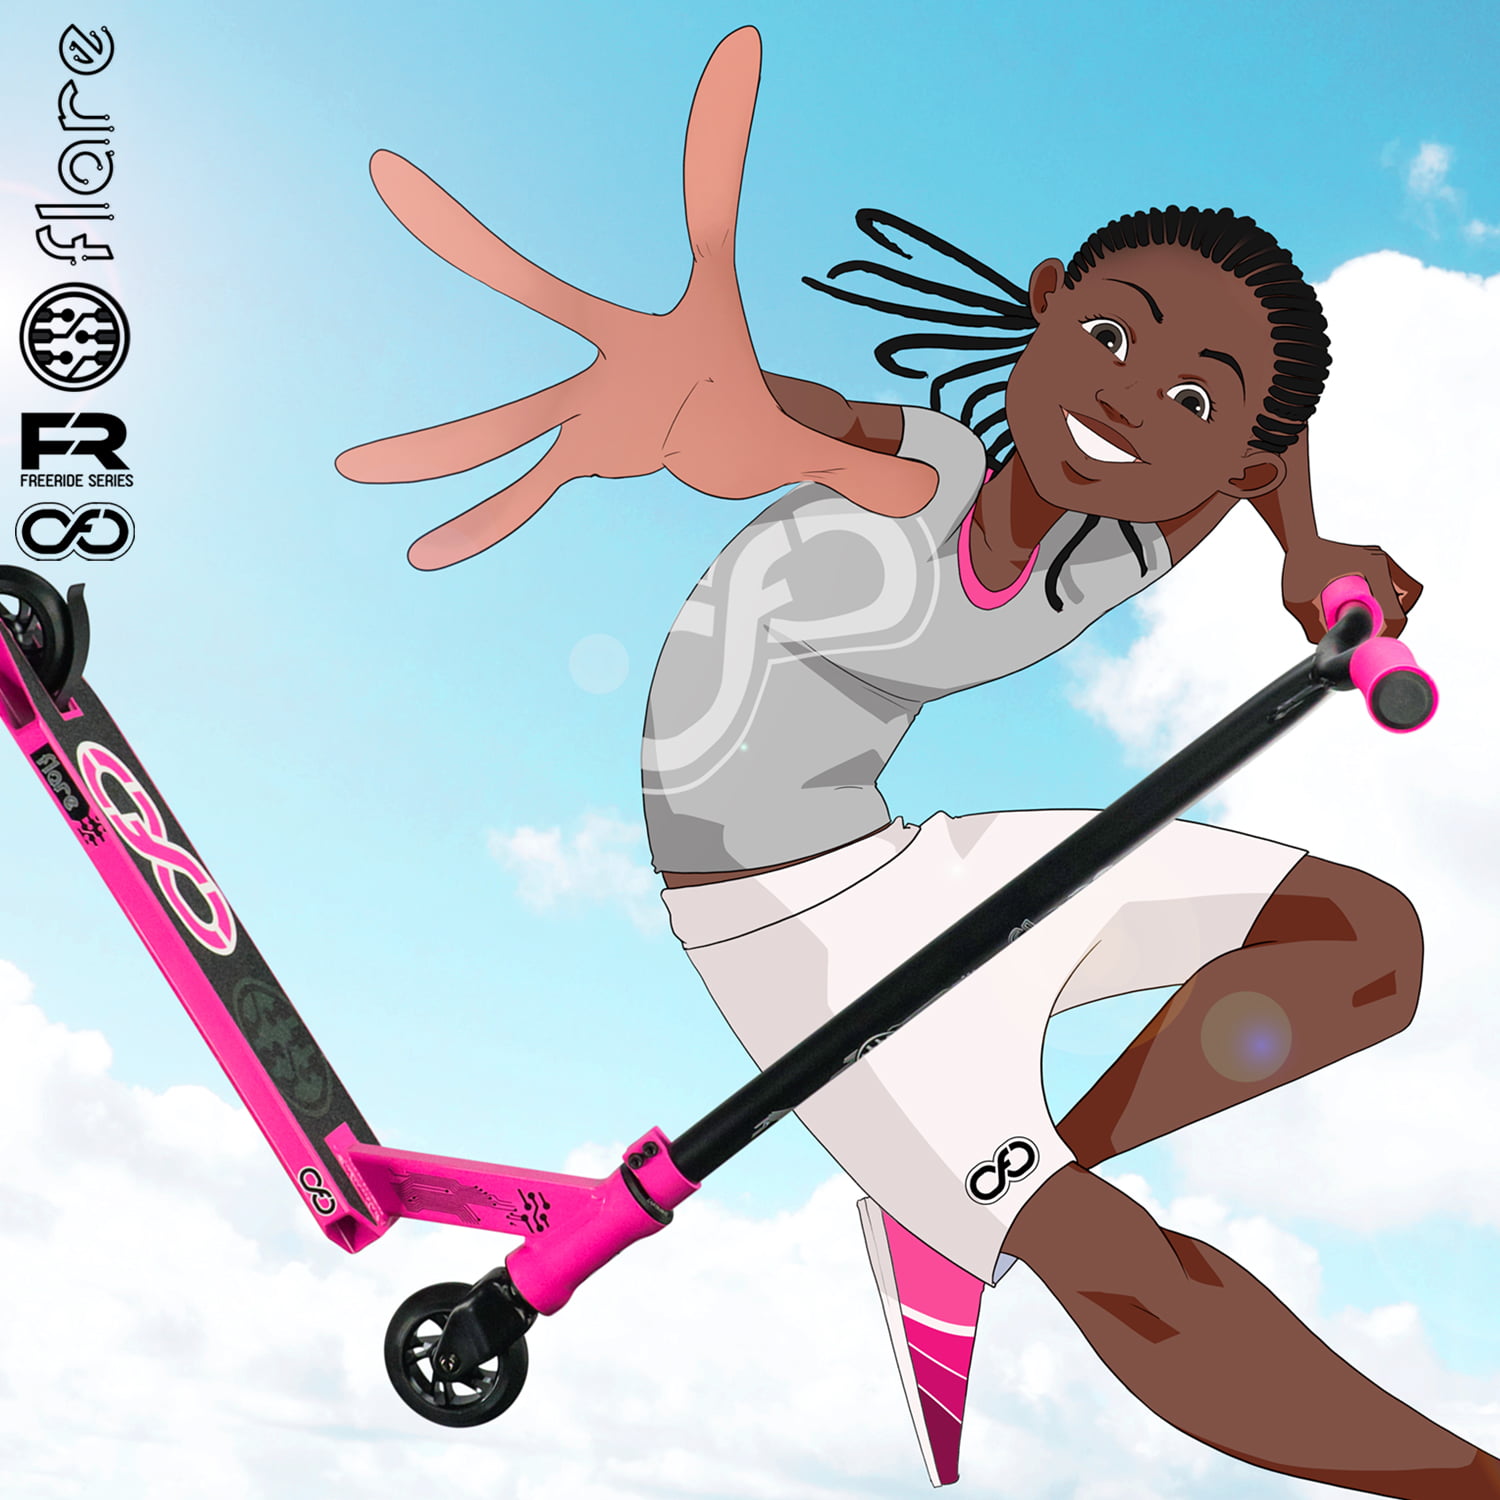 Crazy Skates Stunt Series Kick Scooter - Fun Trick Scooters for the Street  and Skate Park - Choose from the Revel, Flare or Fly scooters